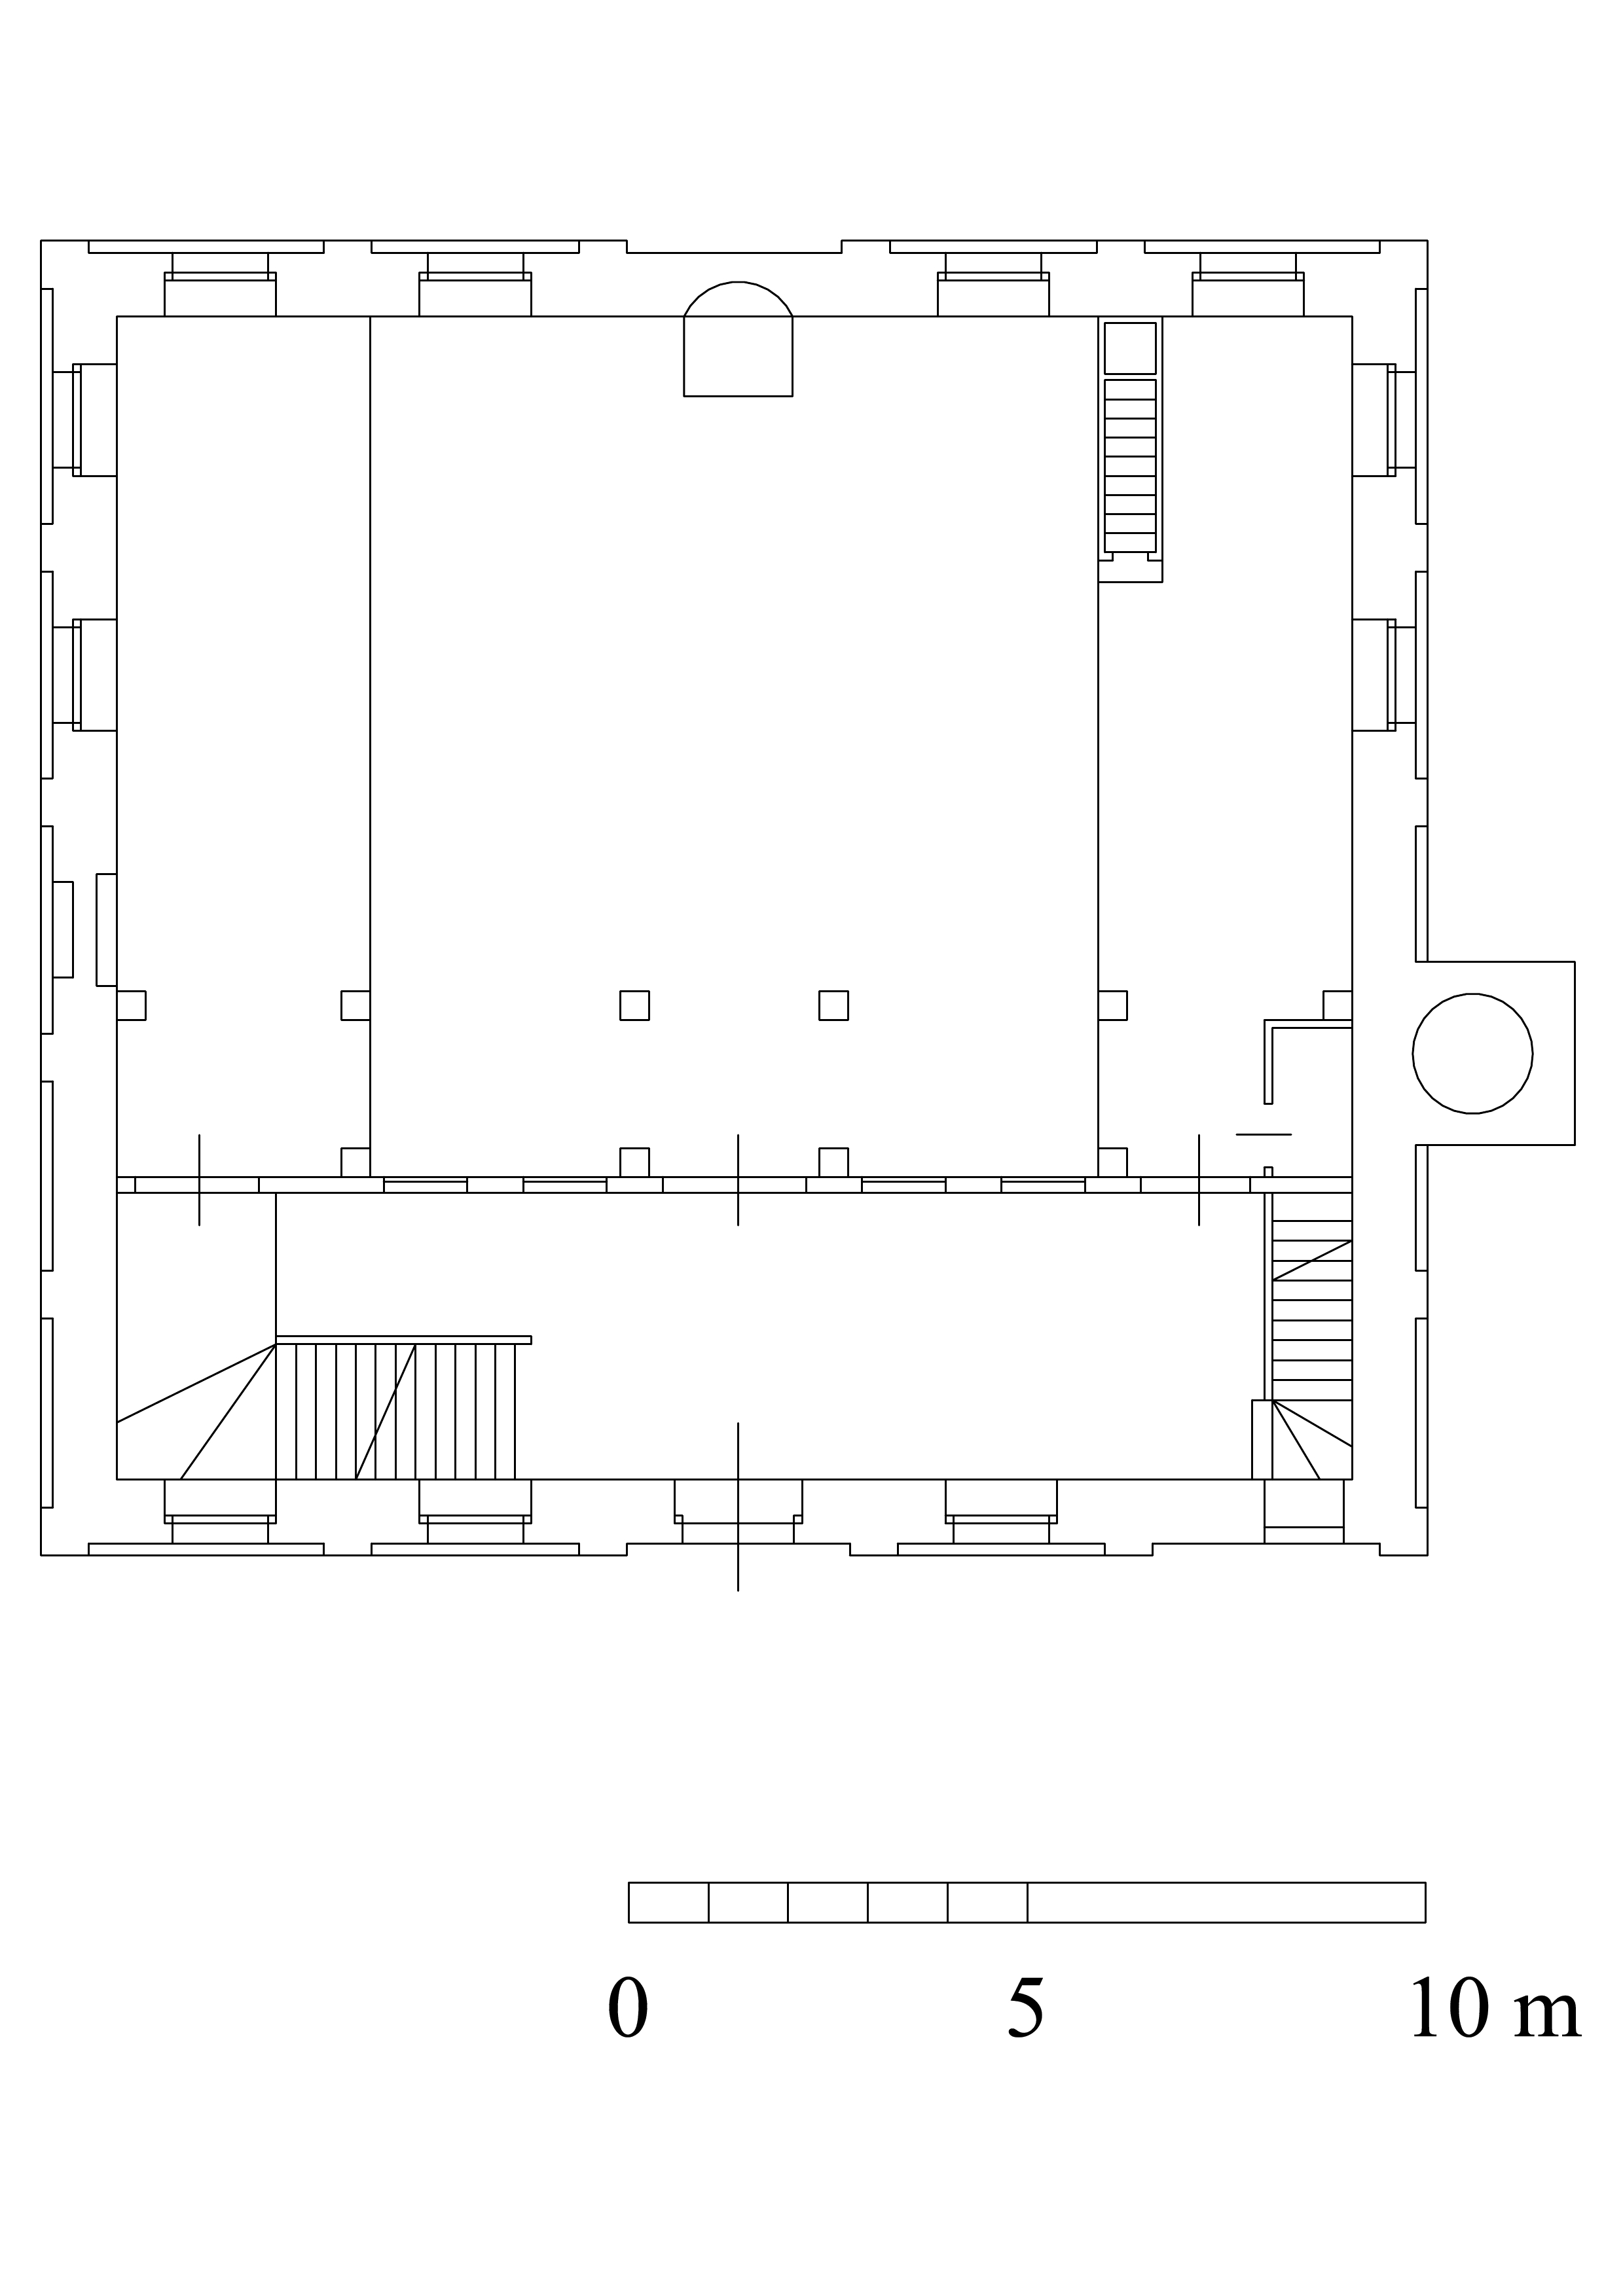 Merkez Efendi Mosque - Floor plan. DWG file in AutoCAD 2000 format. Click the download button to download a zipped file containing the .dwg file.